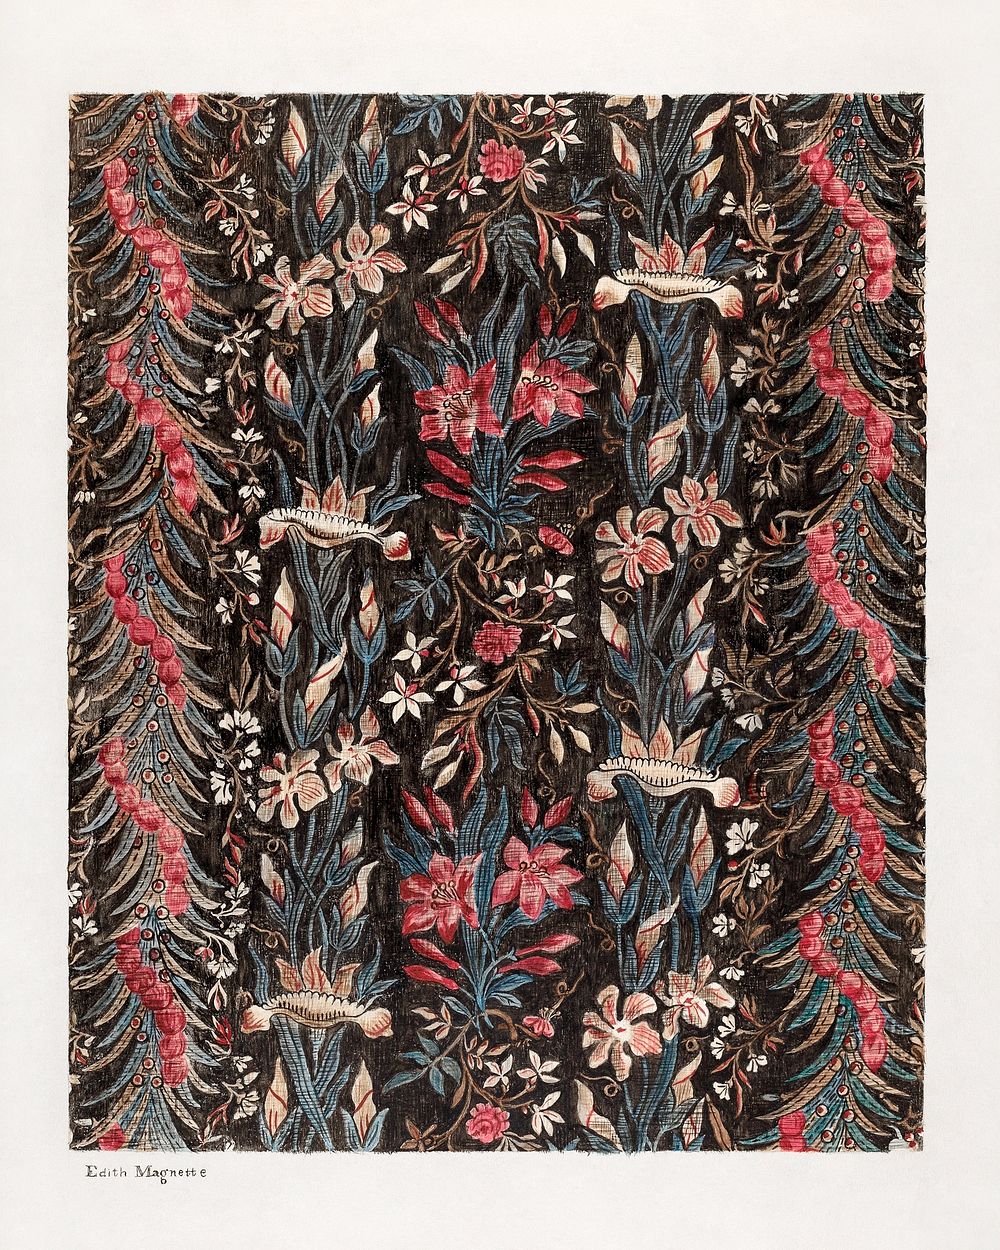 Printed Cotton (ca. 1939) by Edith Magnette. Original public domain image from The National Gallery of Art. Digitally…